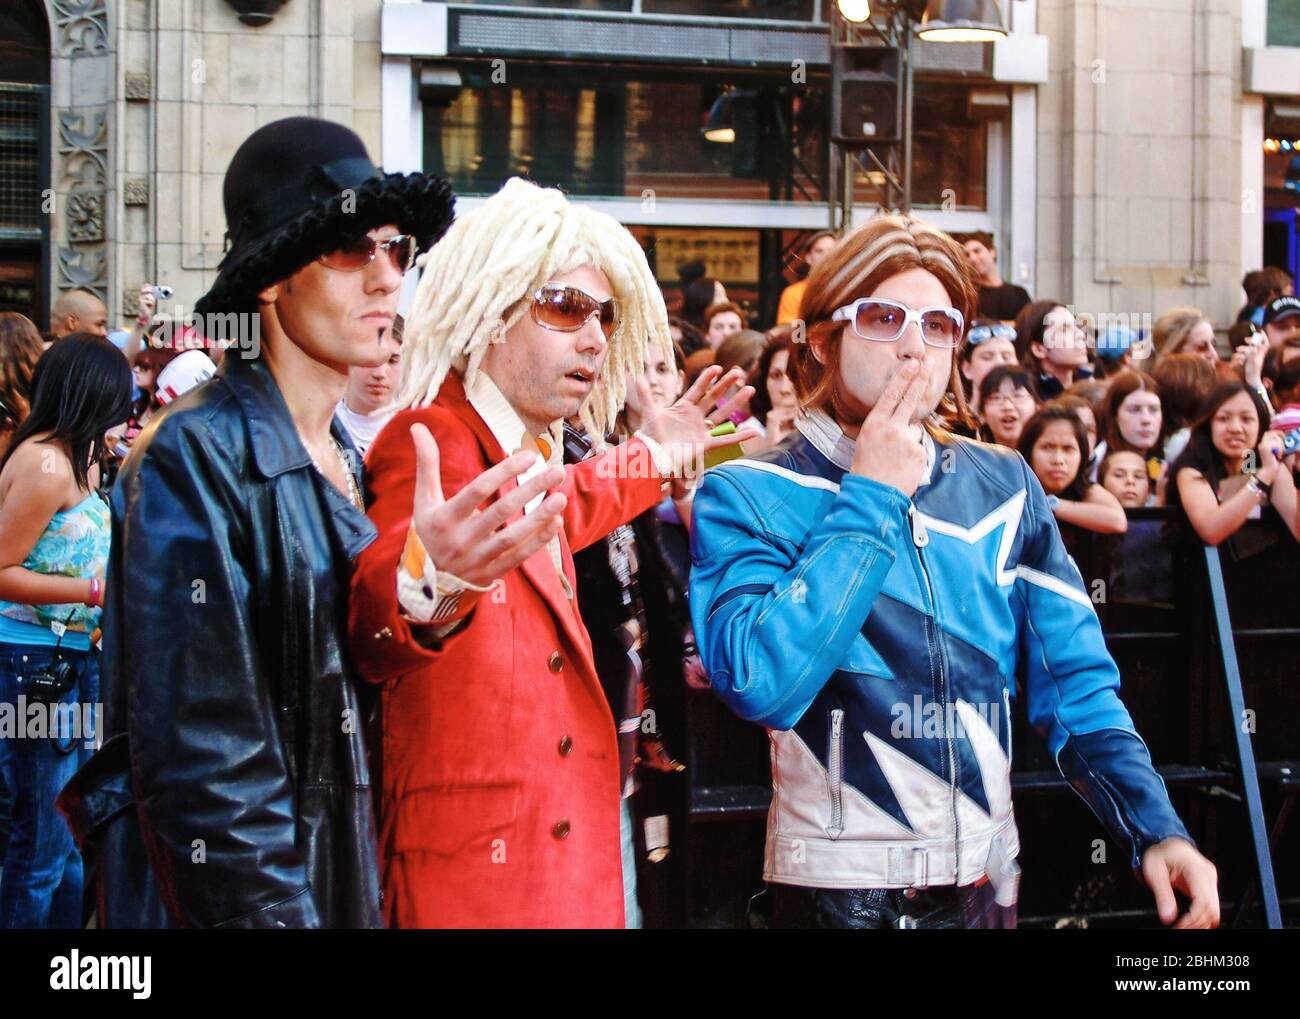 24 April 2020 - The live documentary ''Beastie Boys Story'',  focusing on the history and legacy of the Beastie Boys, is released on Apple TV+.  File Photo: MMVA 2004, MuchMusic HQ, Toronto, Ontario, Canada. (Credit Image: © Brent Perniac/AdMedia via ZUMA Wire) Stock Photo